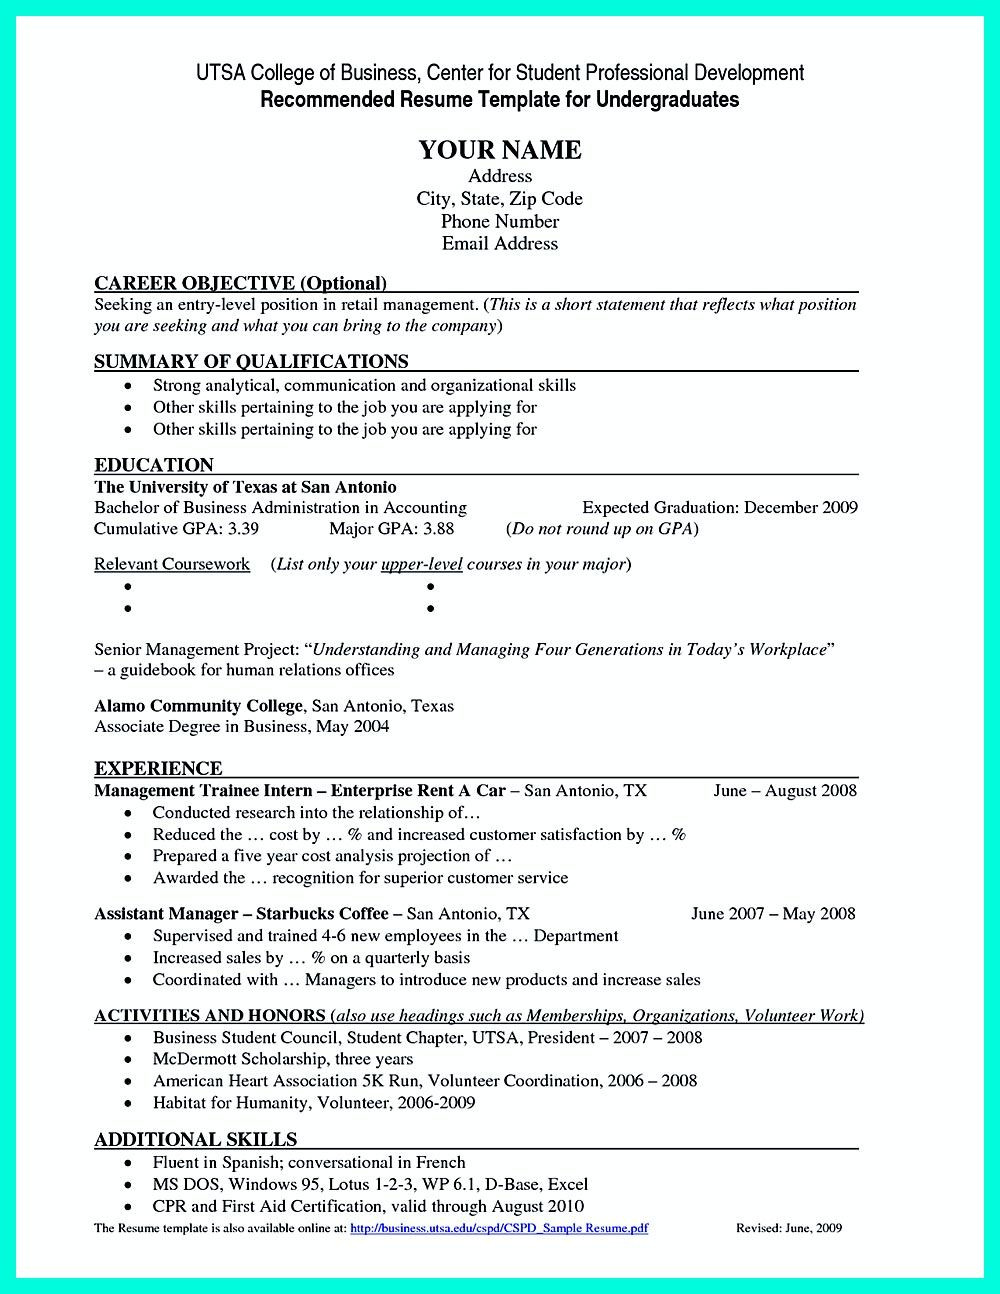 Sample Resume for College Graduate with No Experience Best Current College Student Resume with No Experience Job …